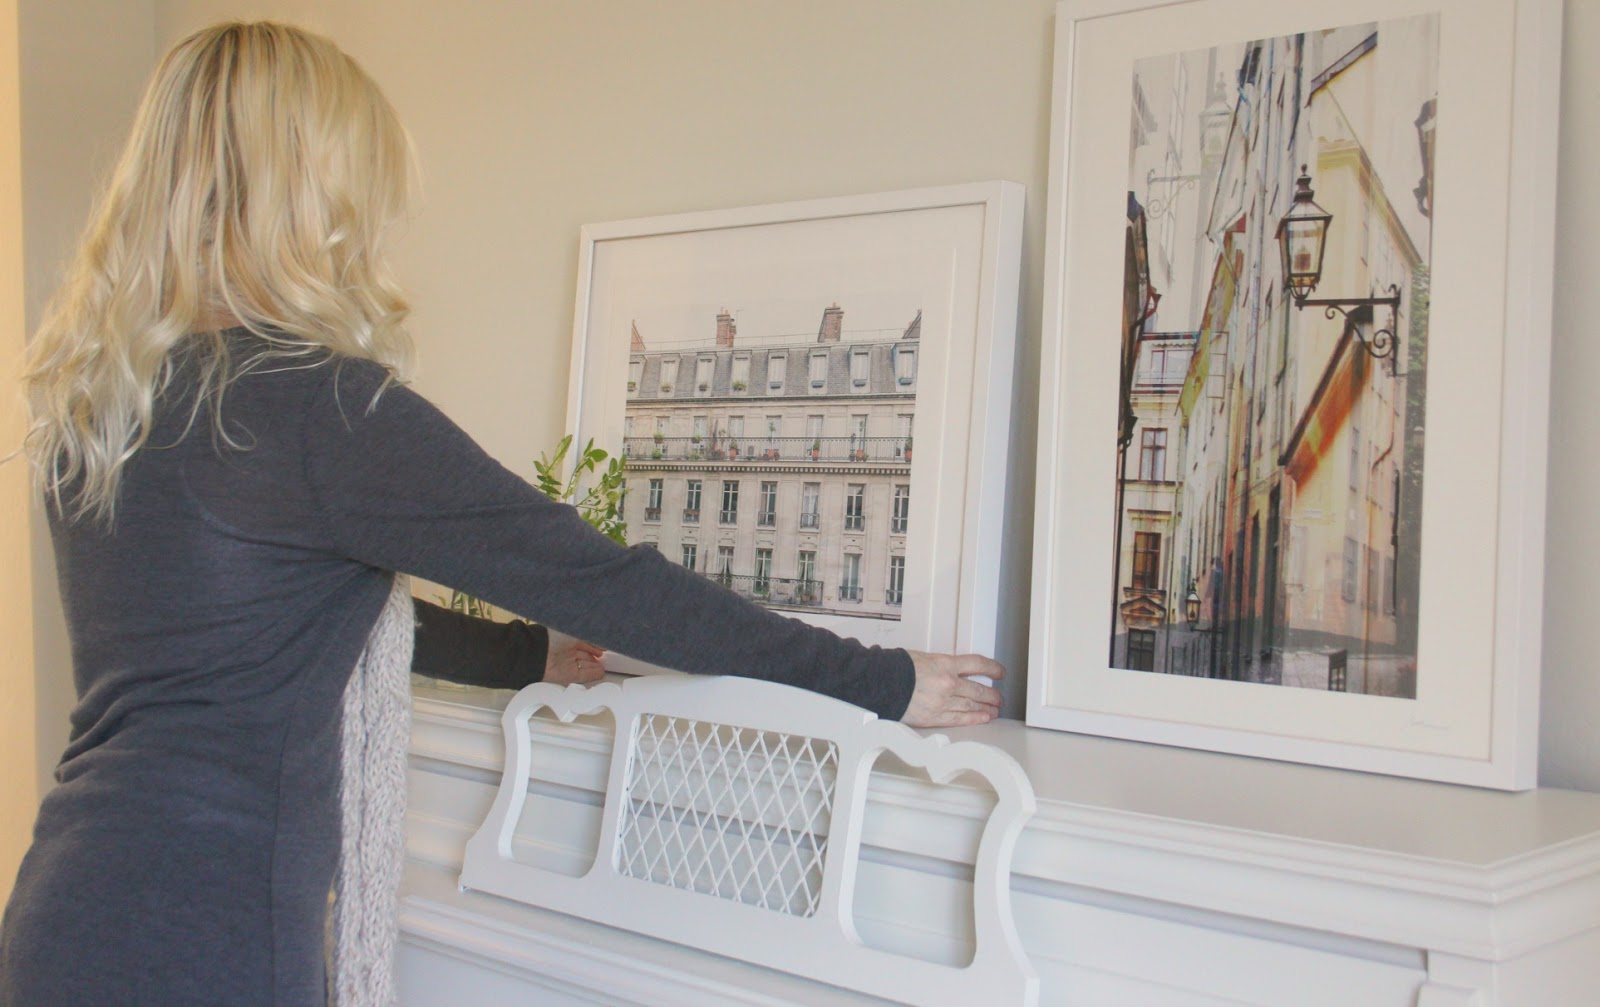 Paris and Stockholm art prints from Minted at Hello Lovely's Arizona Fixer Upper